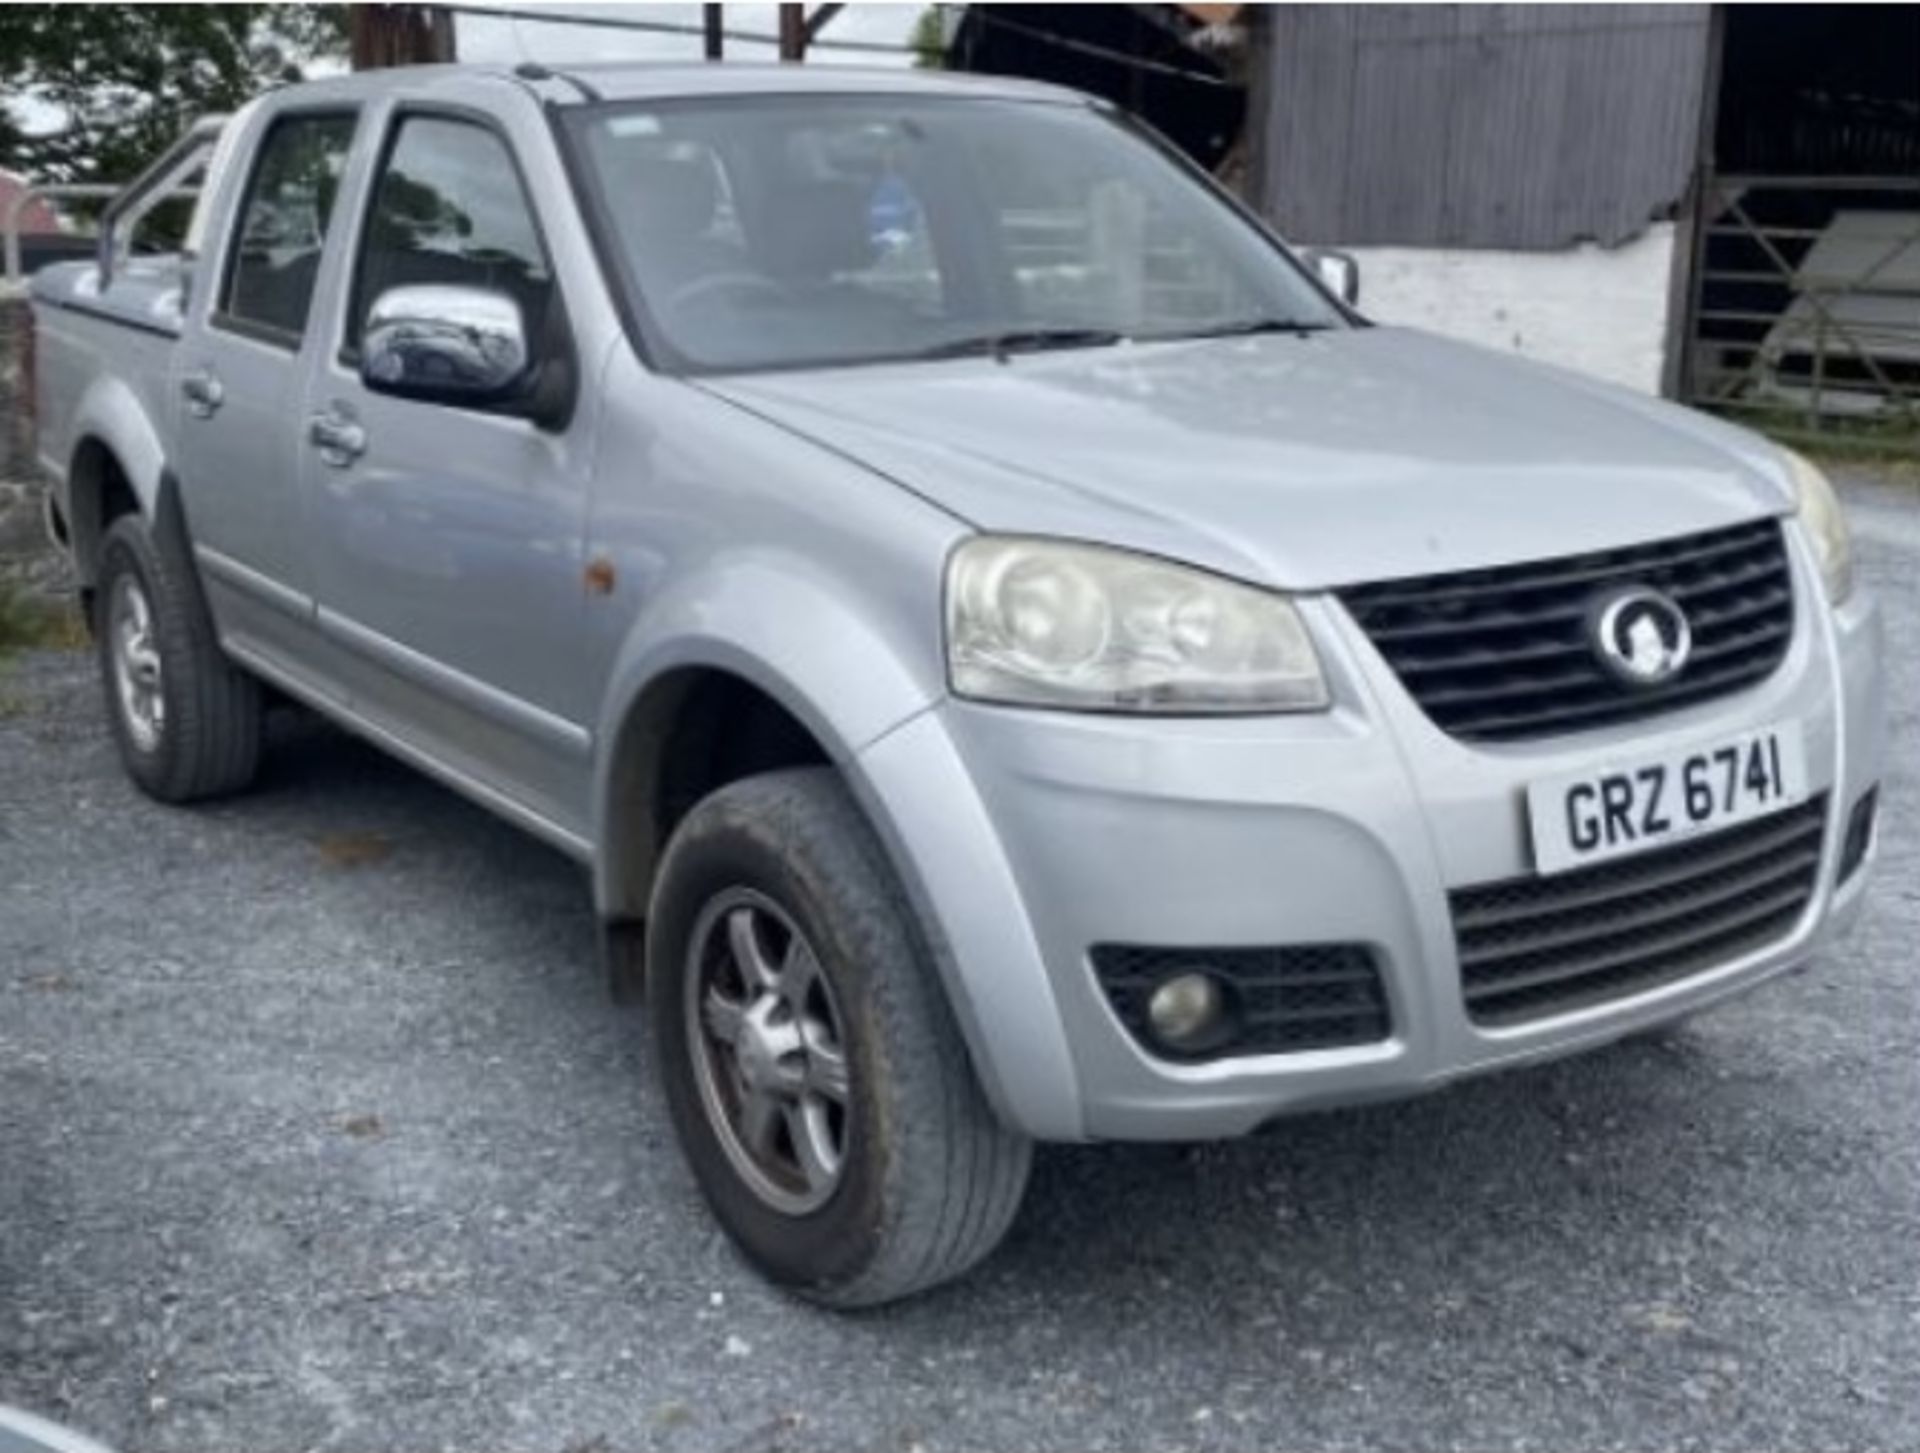 2013 GREAT WALL STEED 2.0 TD 4X4 PICK UP LOCATION N IRELAND - Image 2 of 7